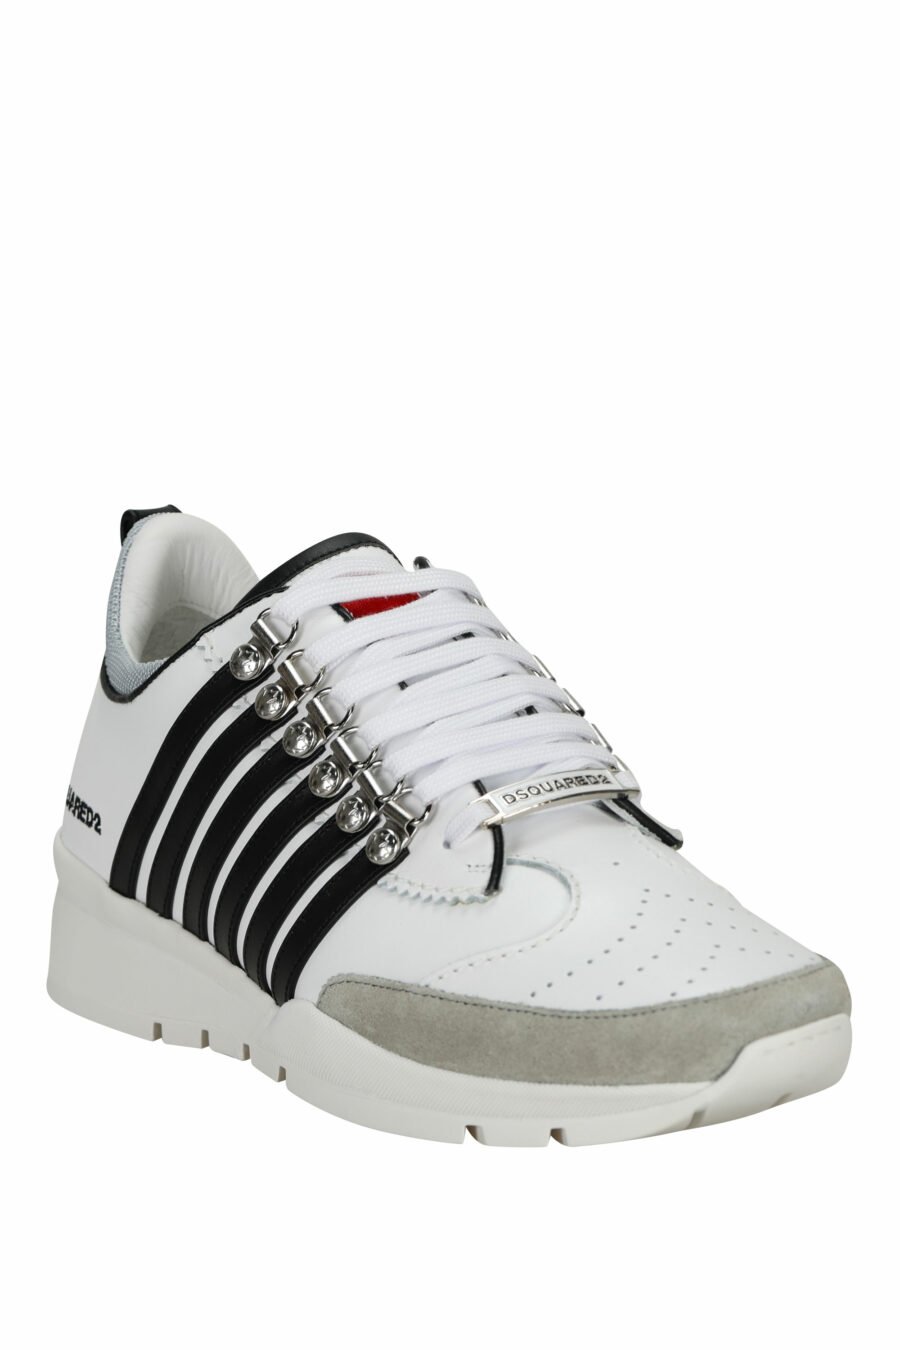 White trainers "legendary" with black stripes - 8055777300930 1